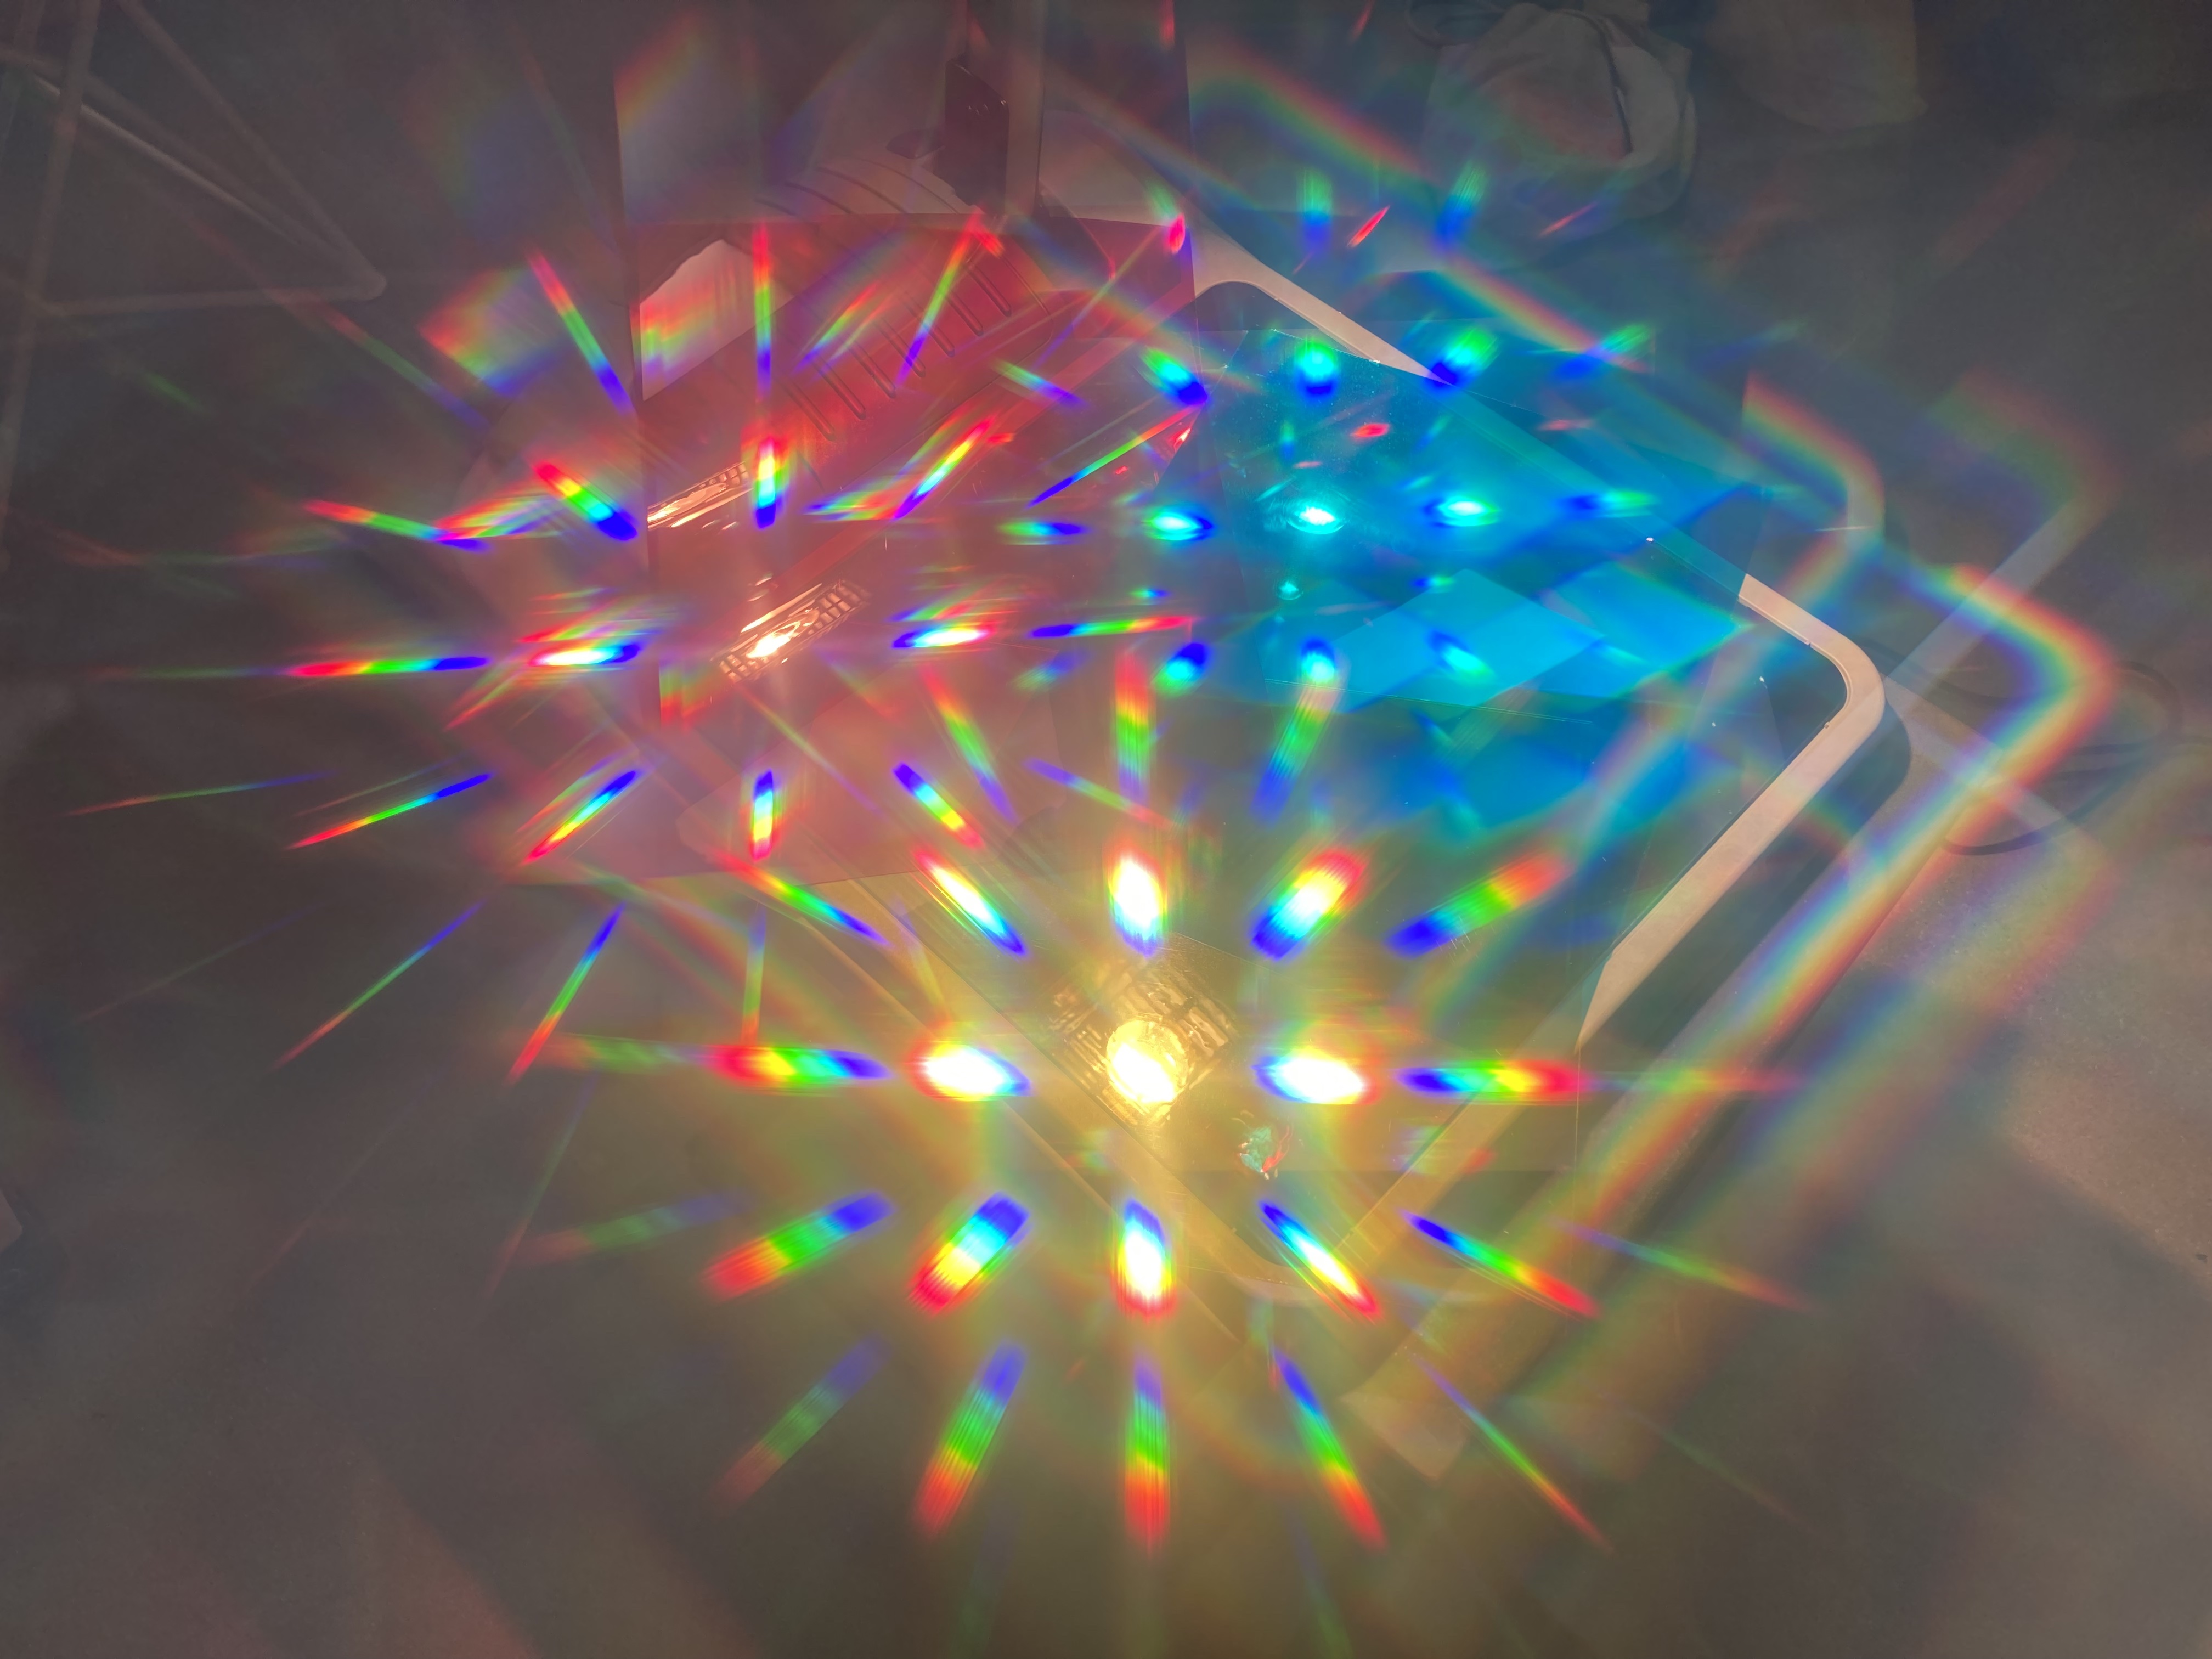 Prisms refracting yellow, blue and red light in an abstract pattern 